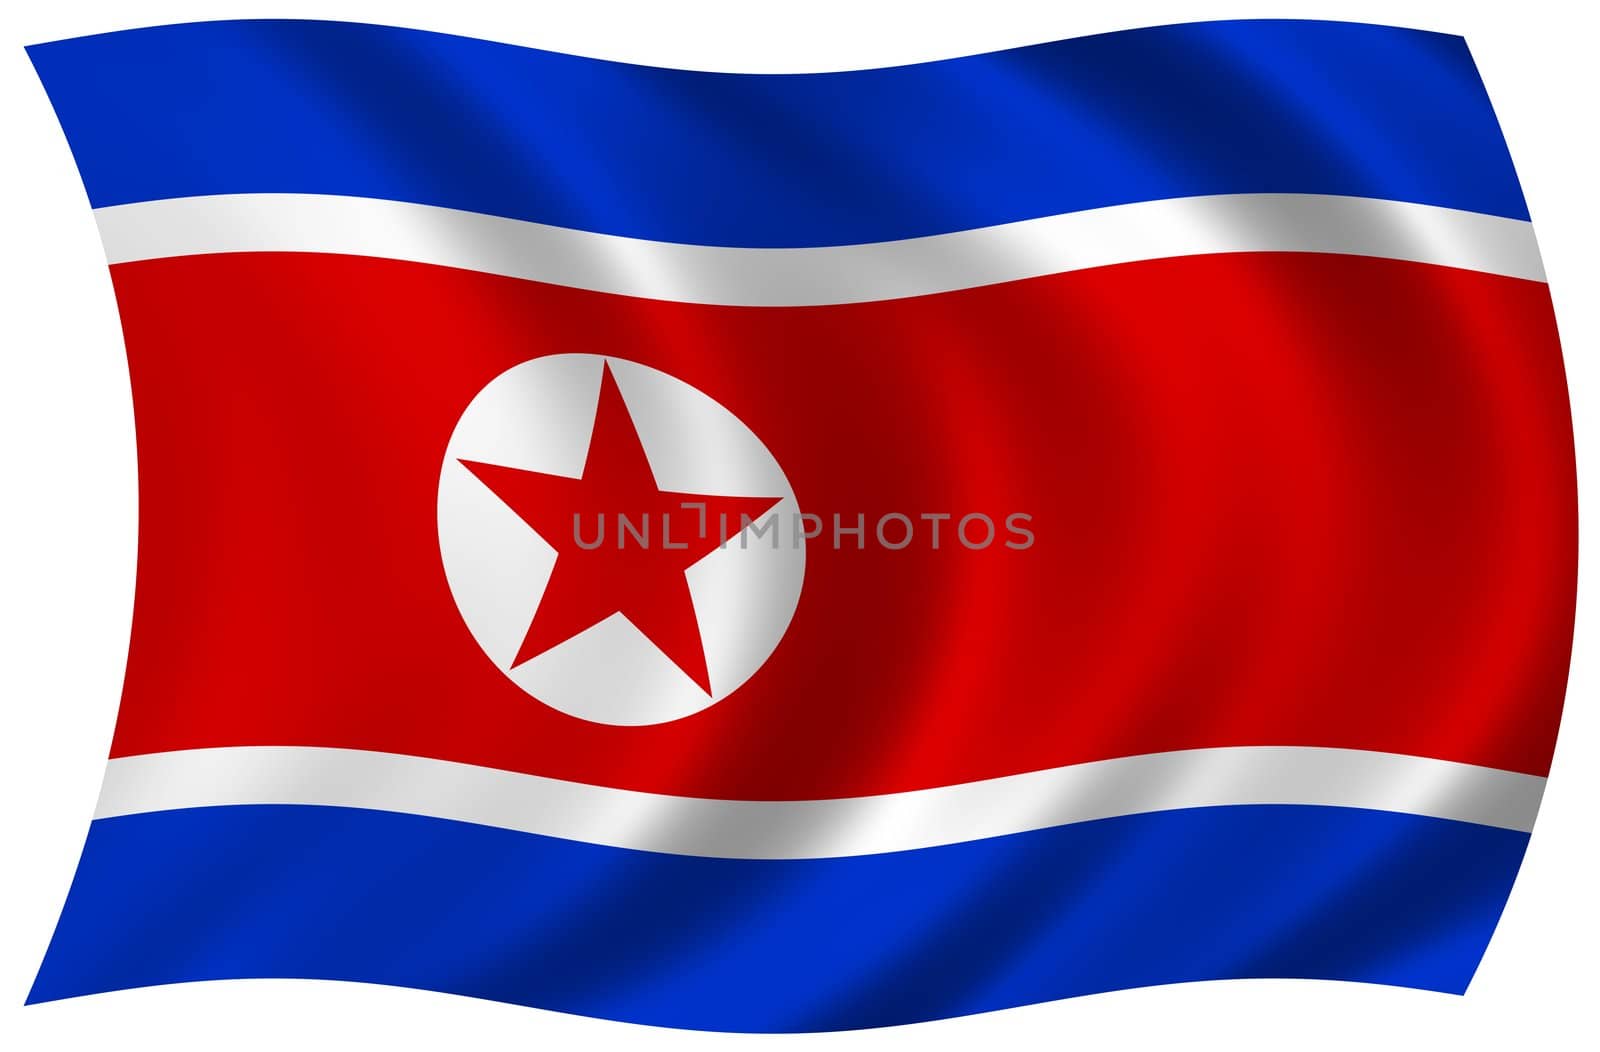 Flag of North Korea by peromarketing